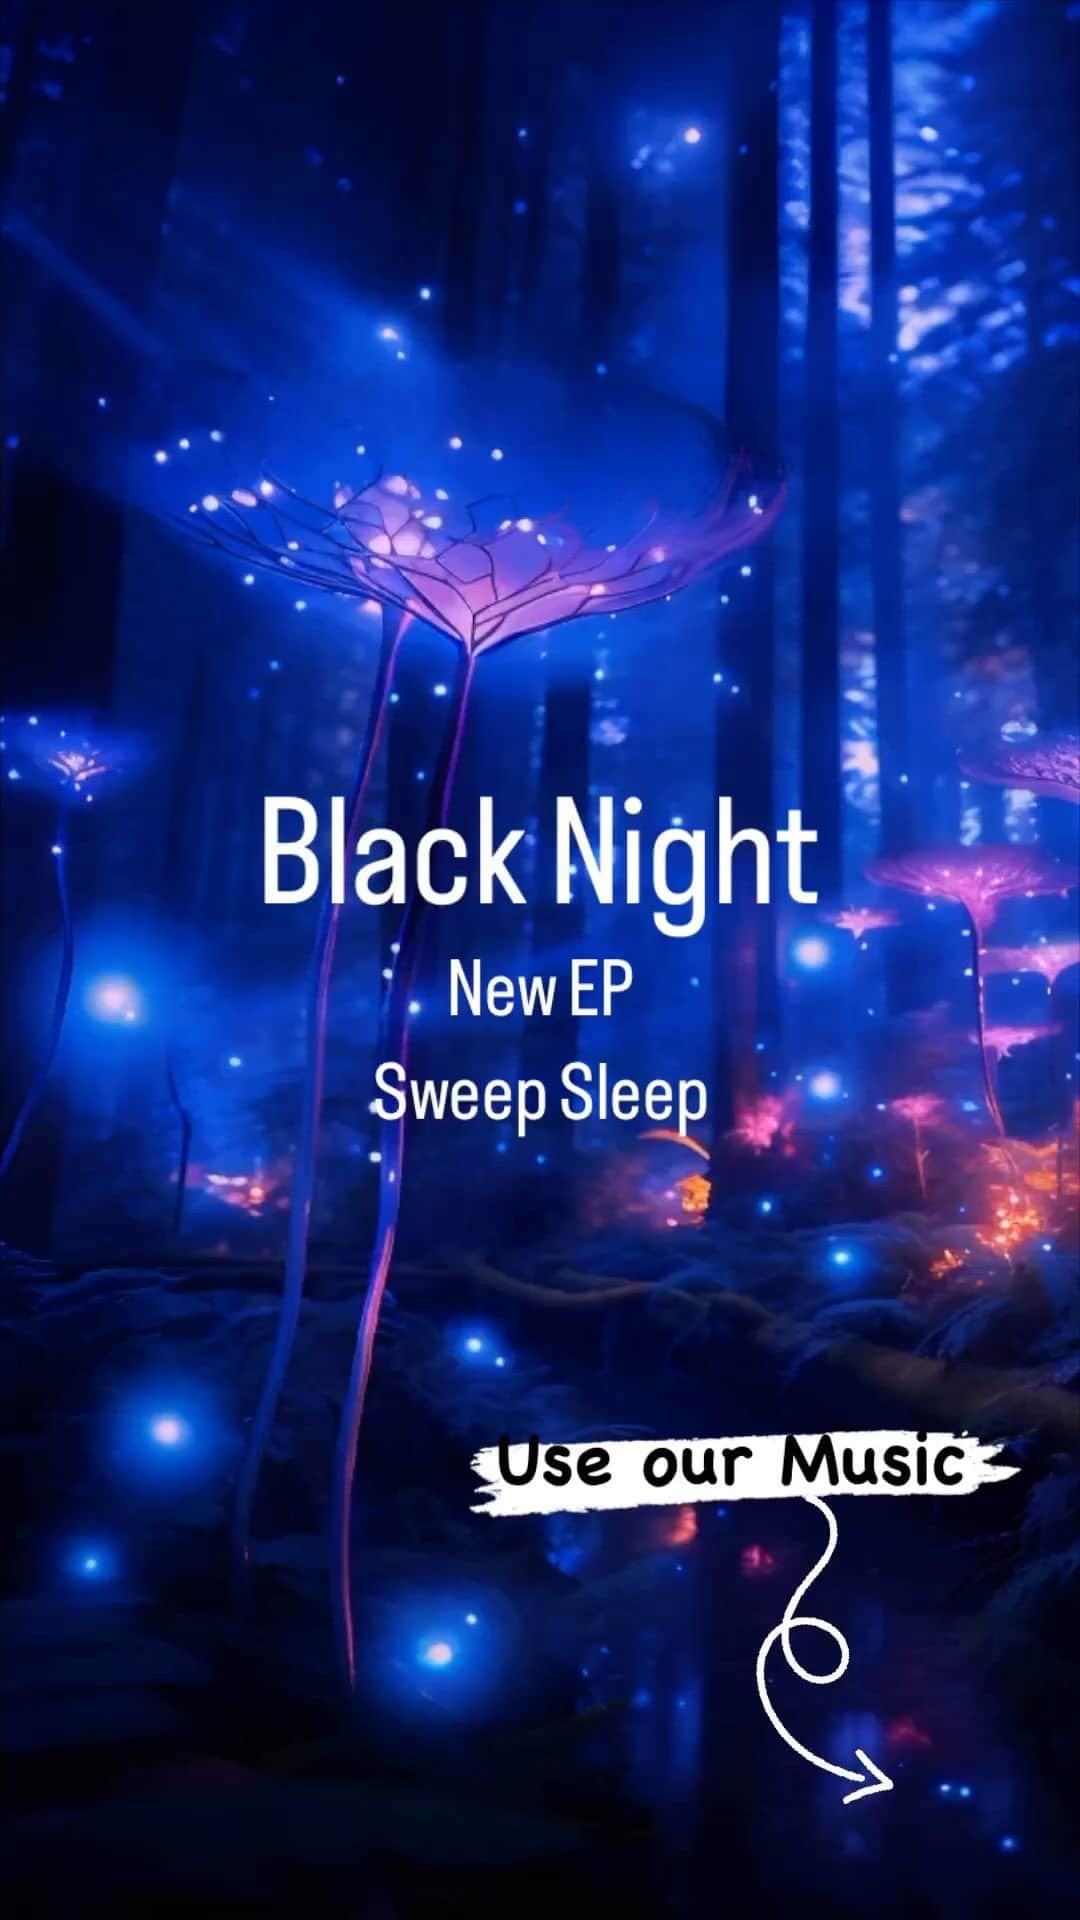 Cafe Music BGM channelのインスタグラム：「Surrender to Unique Ambient with Sweep Sleep's 'Black Night' Album🌑✨#Electronic #Ambient #NightVibes  💿 Listen Everywhere: https://bgmc.lnk.to/zXo3W9gv 🎵 Sweep Sleep: https://bgmc.lnk.to/XFWxxODT  ／ 🎂 New Release ＼ November 17th In Stores 🎧 Black Night By Sweep Sleep  #EverydayMusic #AmbientSounds #SweepSleep #BlackNight #ElectronicJourney #ChillVibes #NightTimeMusic #UniqueListening」